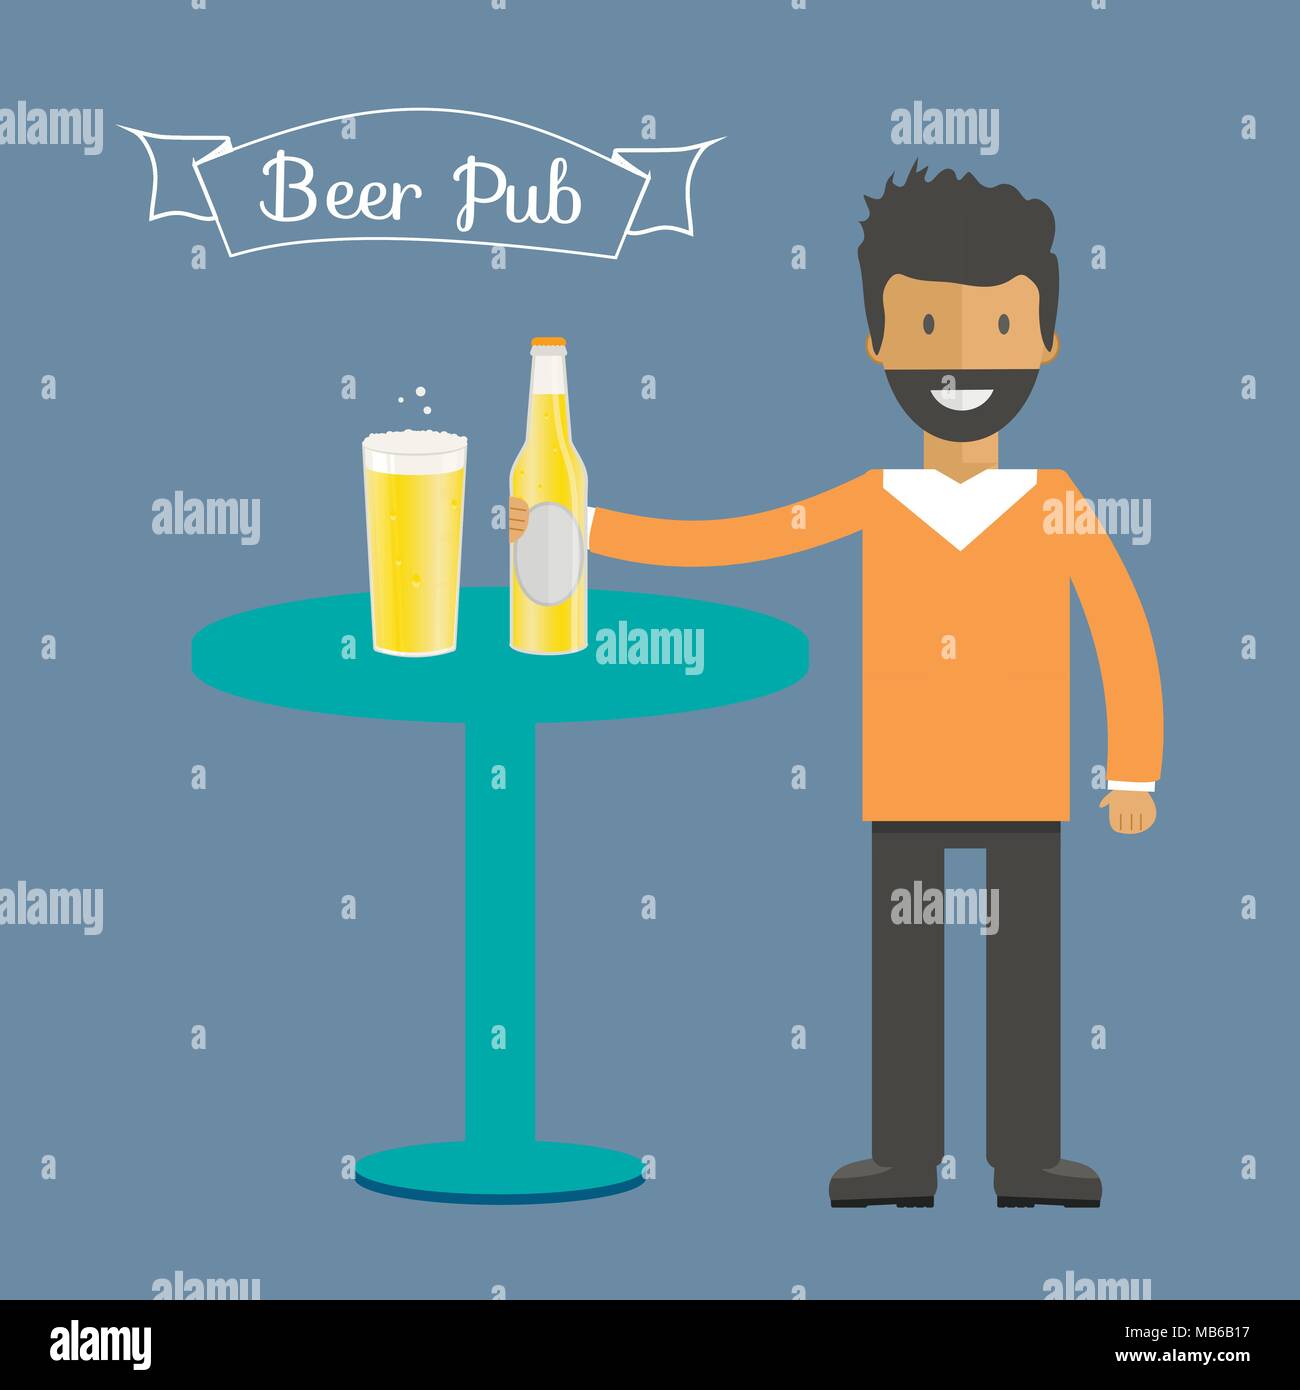 Man with beer bottle, mugs and glasses. Vector icon with alcoholic beverages. Wheat beer, lager, craft beer, ale. Stock Vector